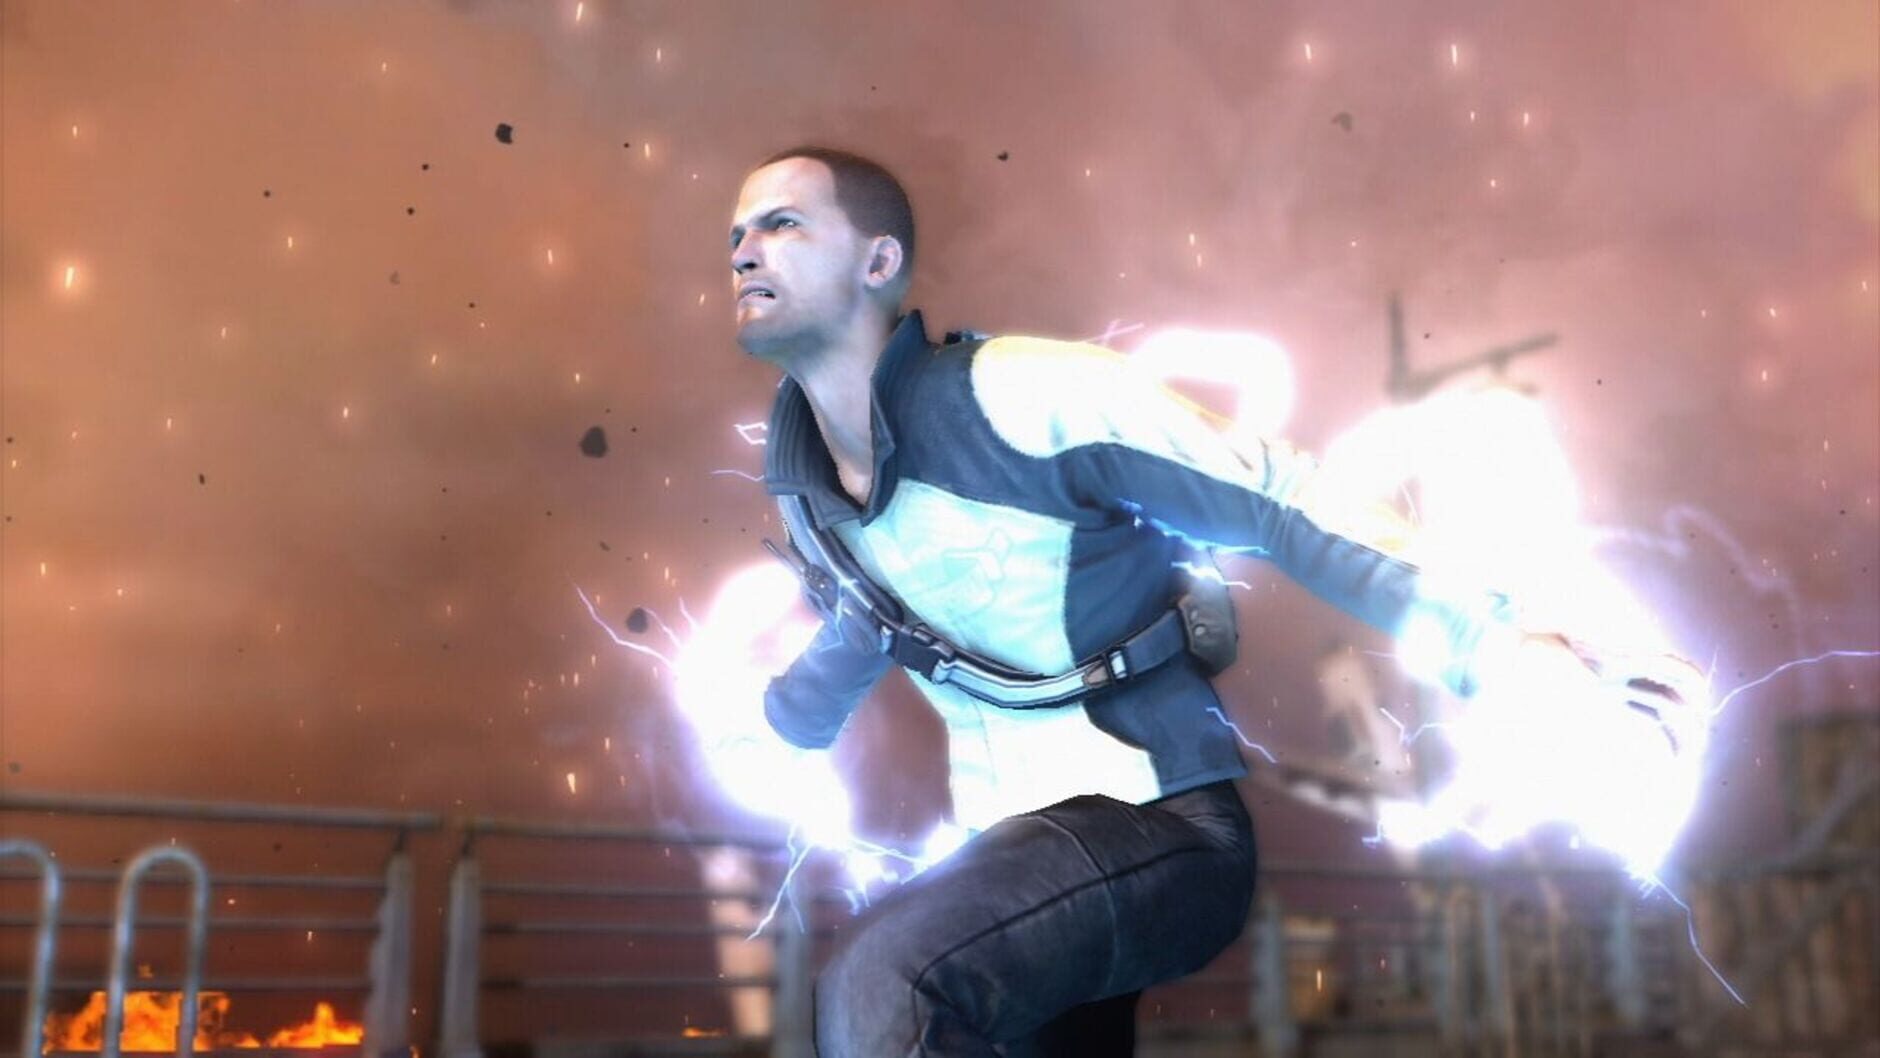 Screenshot for Infamous: Hero Edition